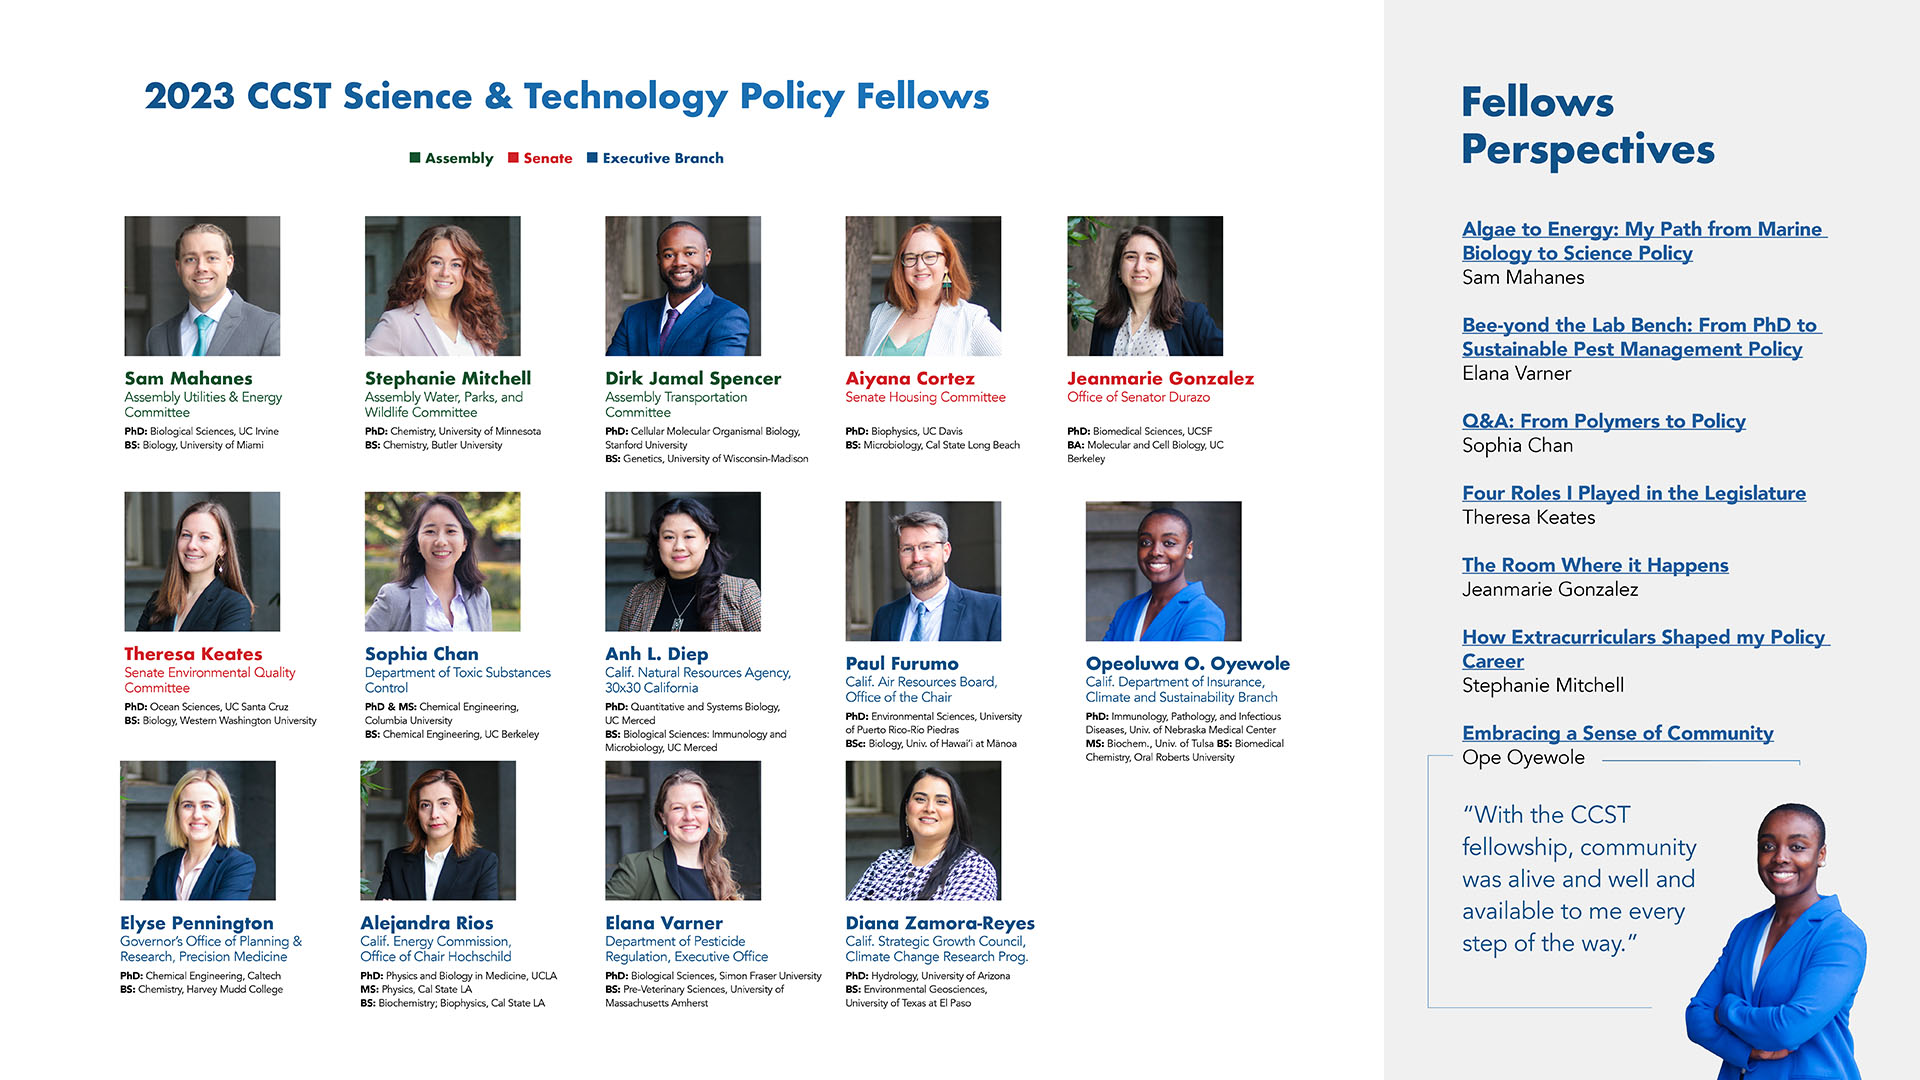 A grid roster of the 2023 Fellows and their placements along with a listing of their blog posts and a photo/quote of Fellow Ope Oyewole: "With the CCST fellowship, community was alive and well and available to me every step of the way."